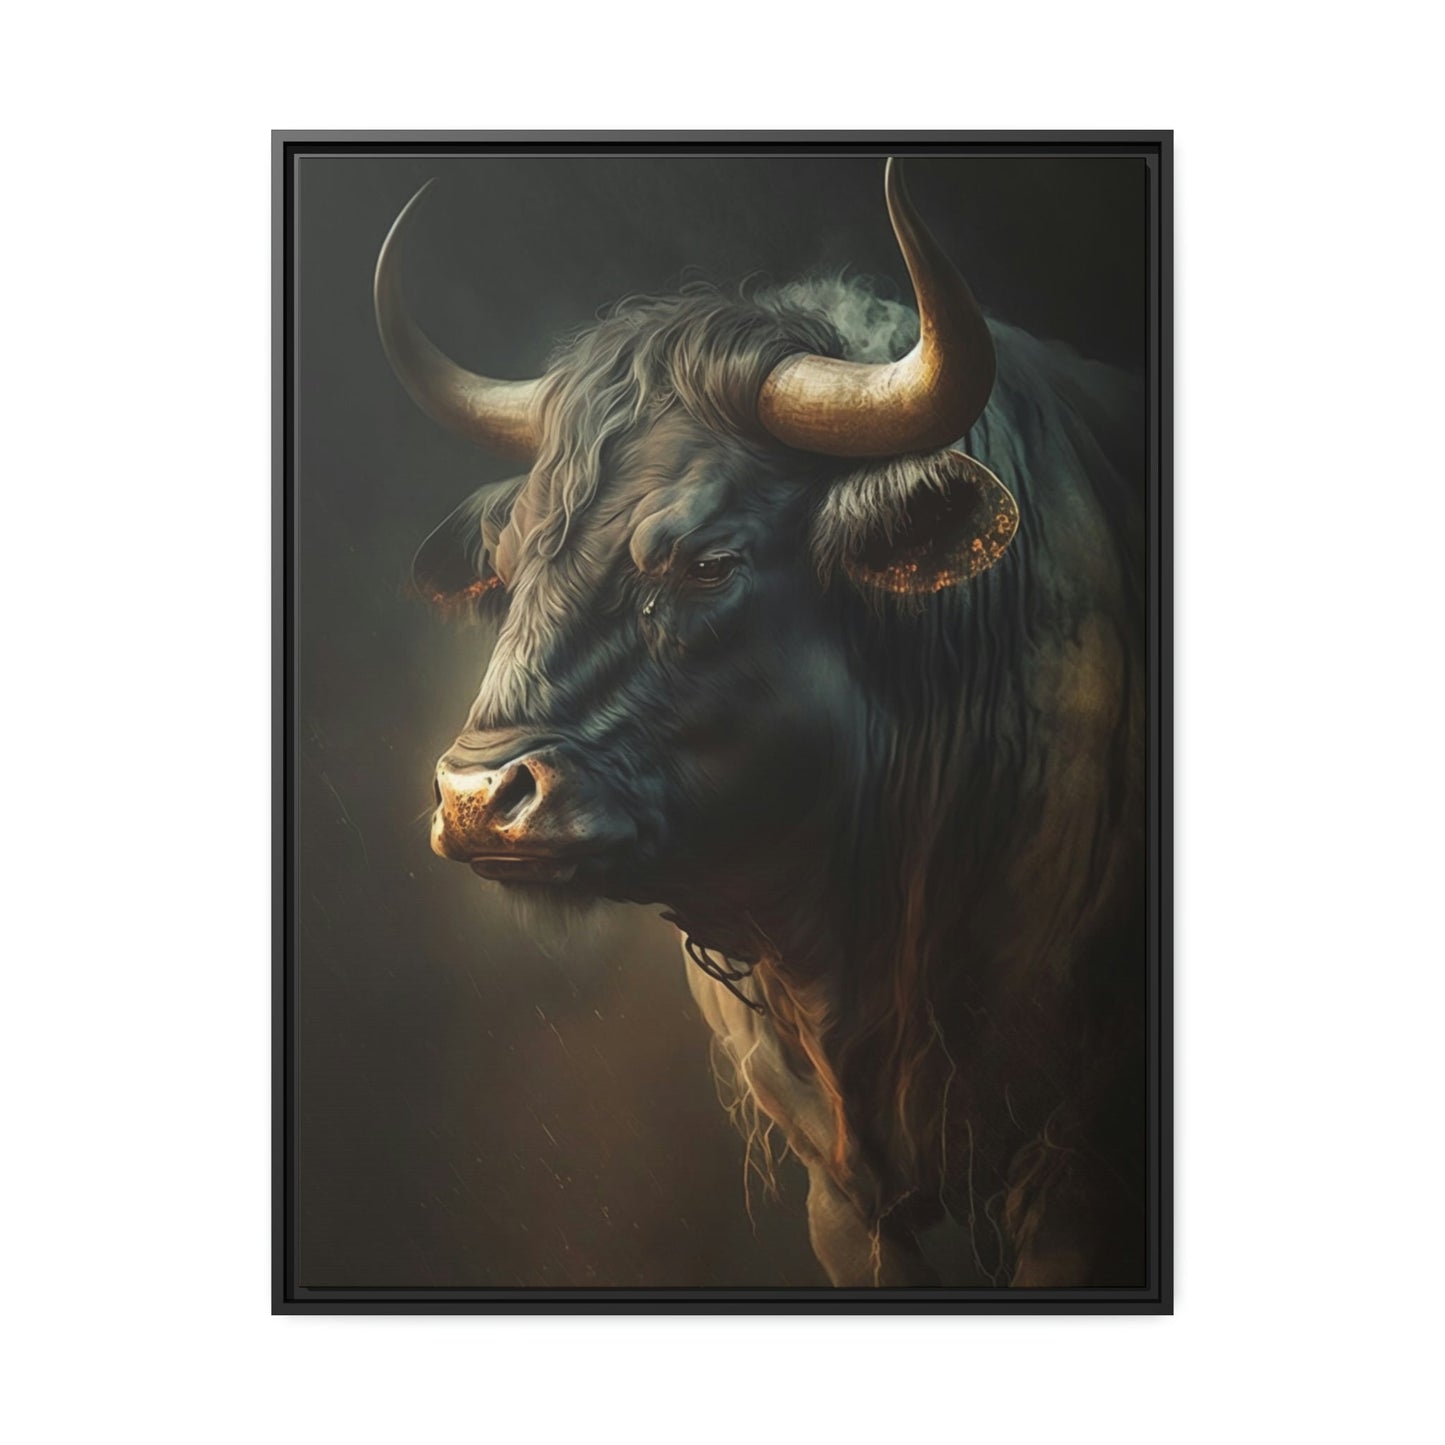 Bull's Strength: Canvas Wall Art Print of Majestic Horned Animal